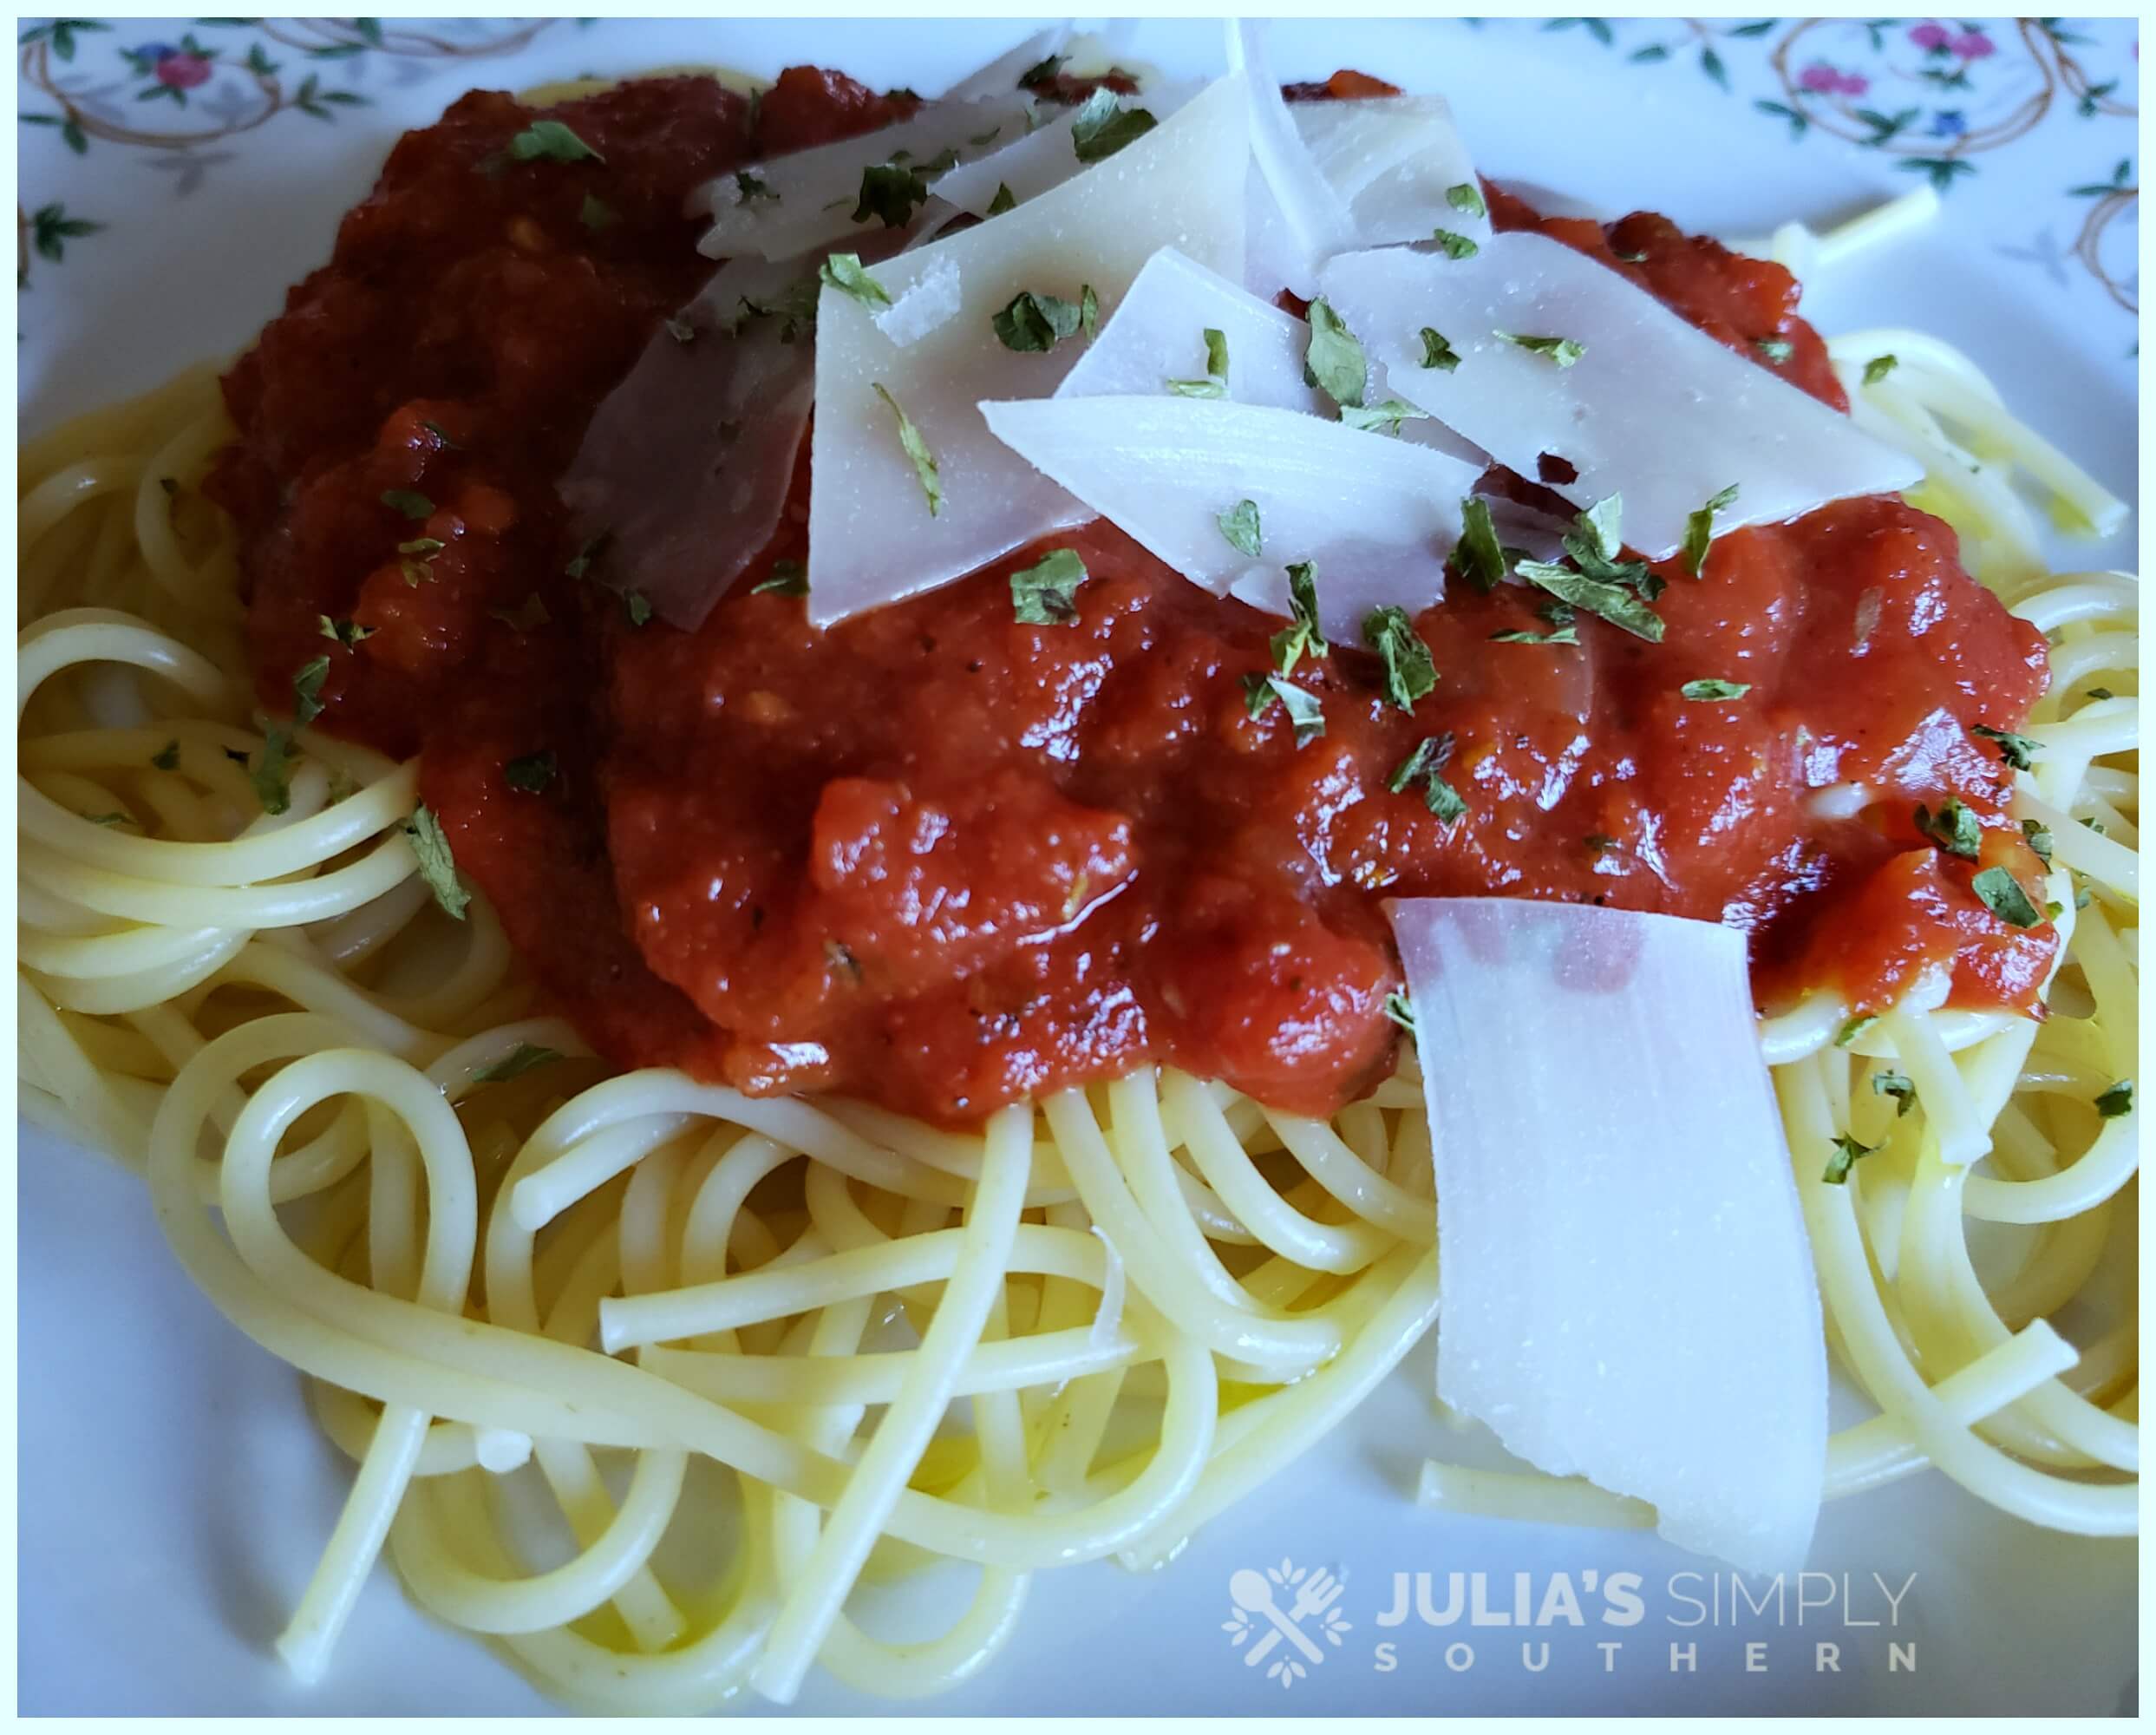 Spaghetti with marinara and Parmesan on a floral china plate garnished with parsley